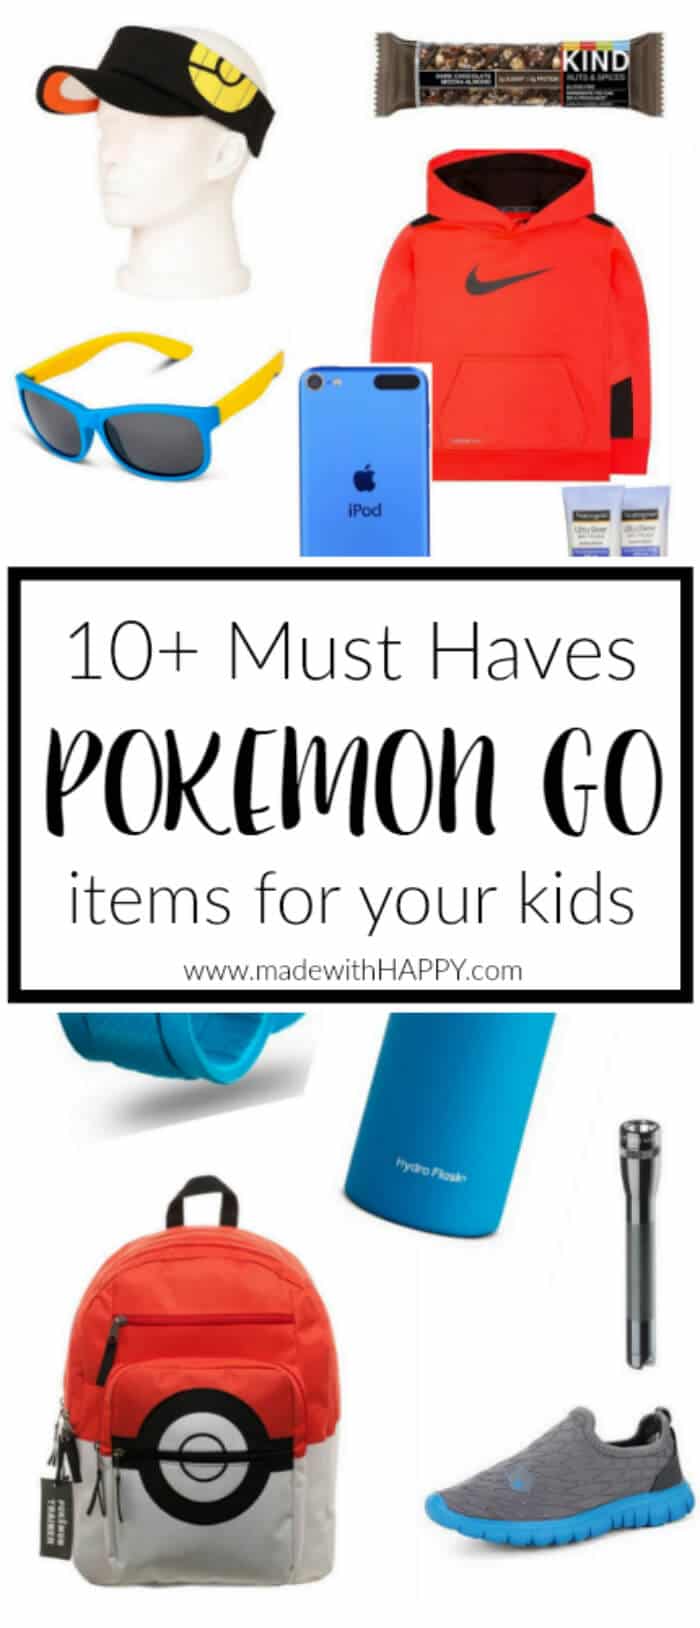 Pokemon Go for Kids | Pokemon Go Must Have | Items for your kids and their Pokemon Go | How to play Pokemon Go with your kids | All you need for Pokemon Go | www.madewithhappy.com